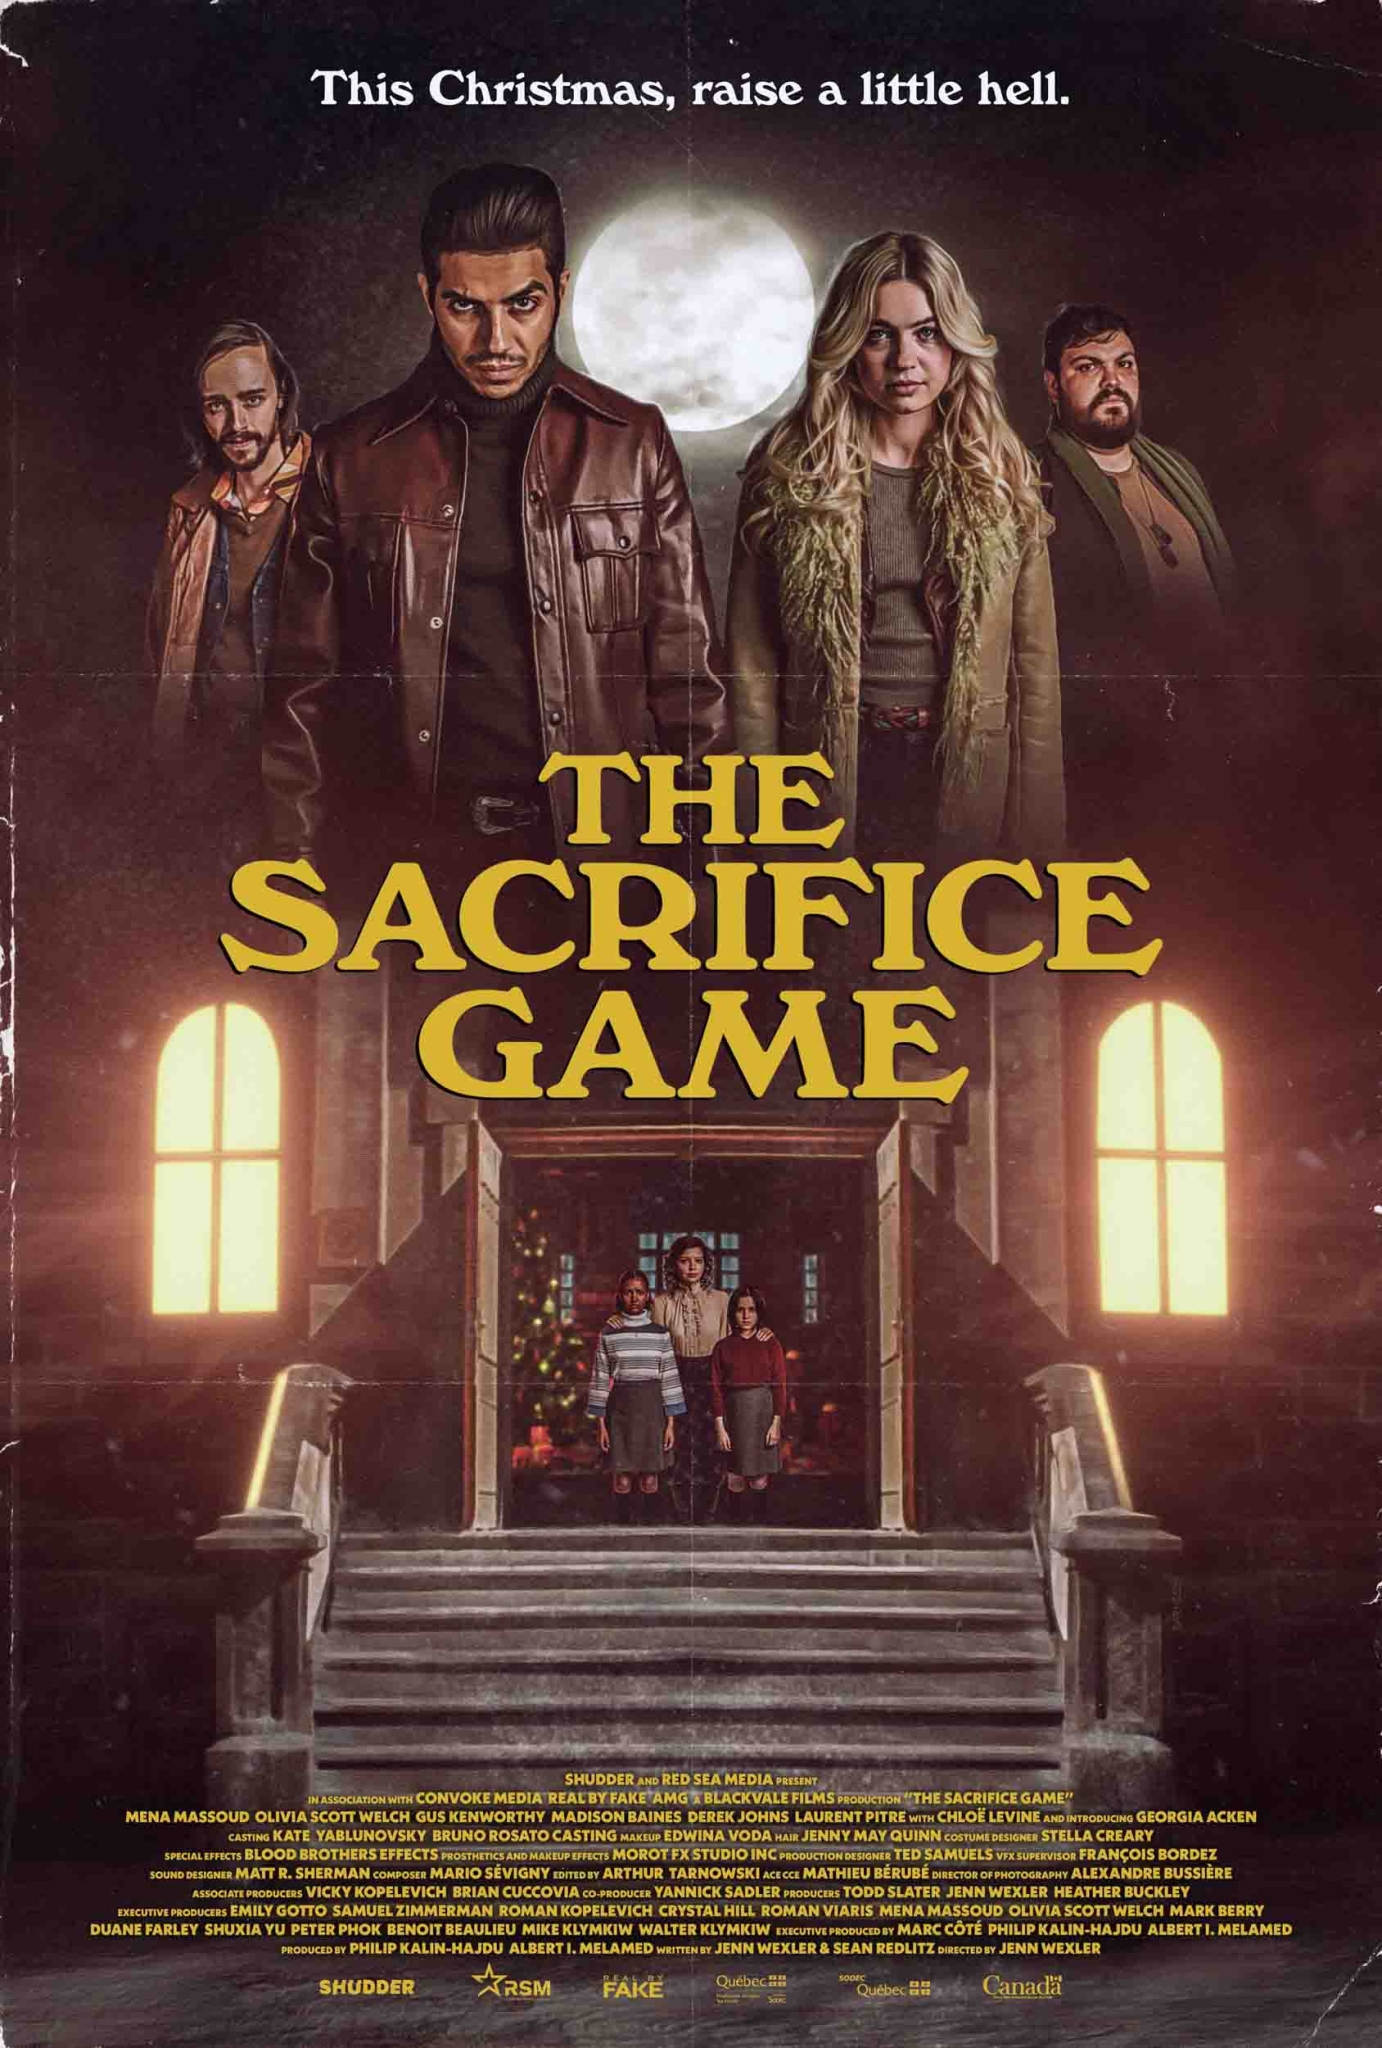 ‘The Sacrifice Game’ Posters Released